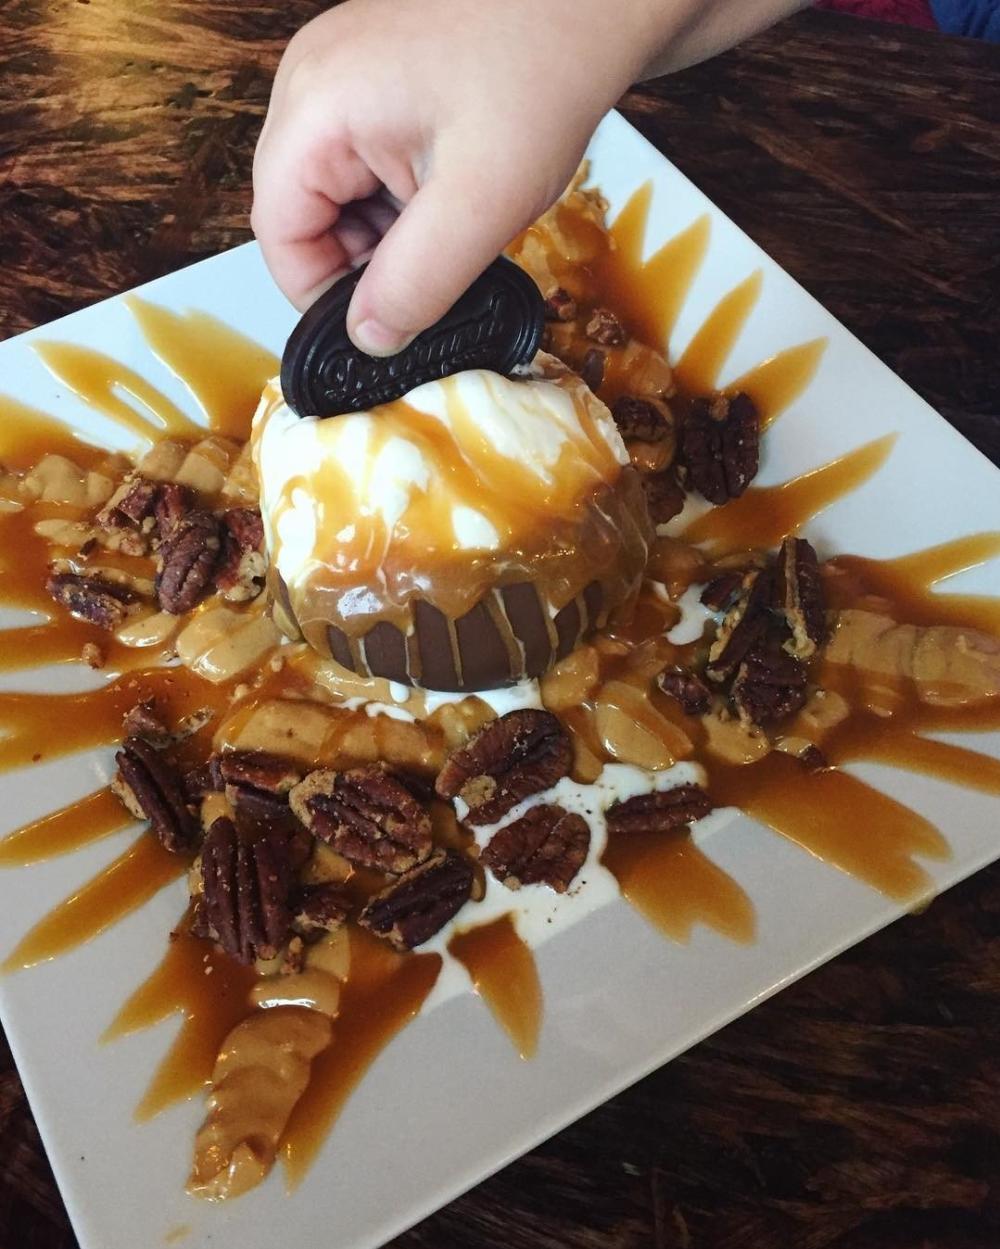 Hot caramel sundae with peanut butter and pecans at DeBrand Fine Chocolates